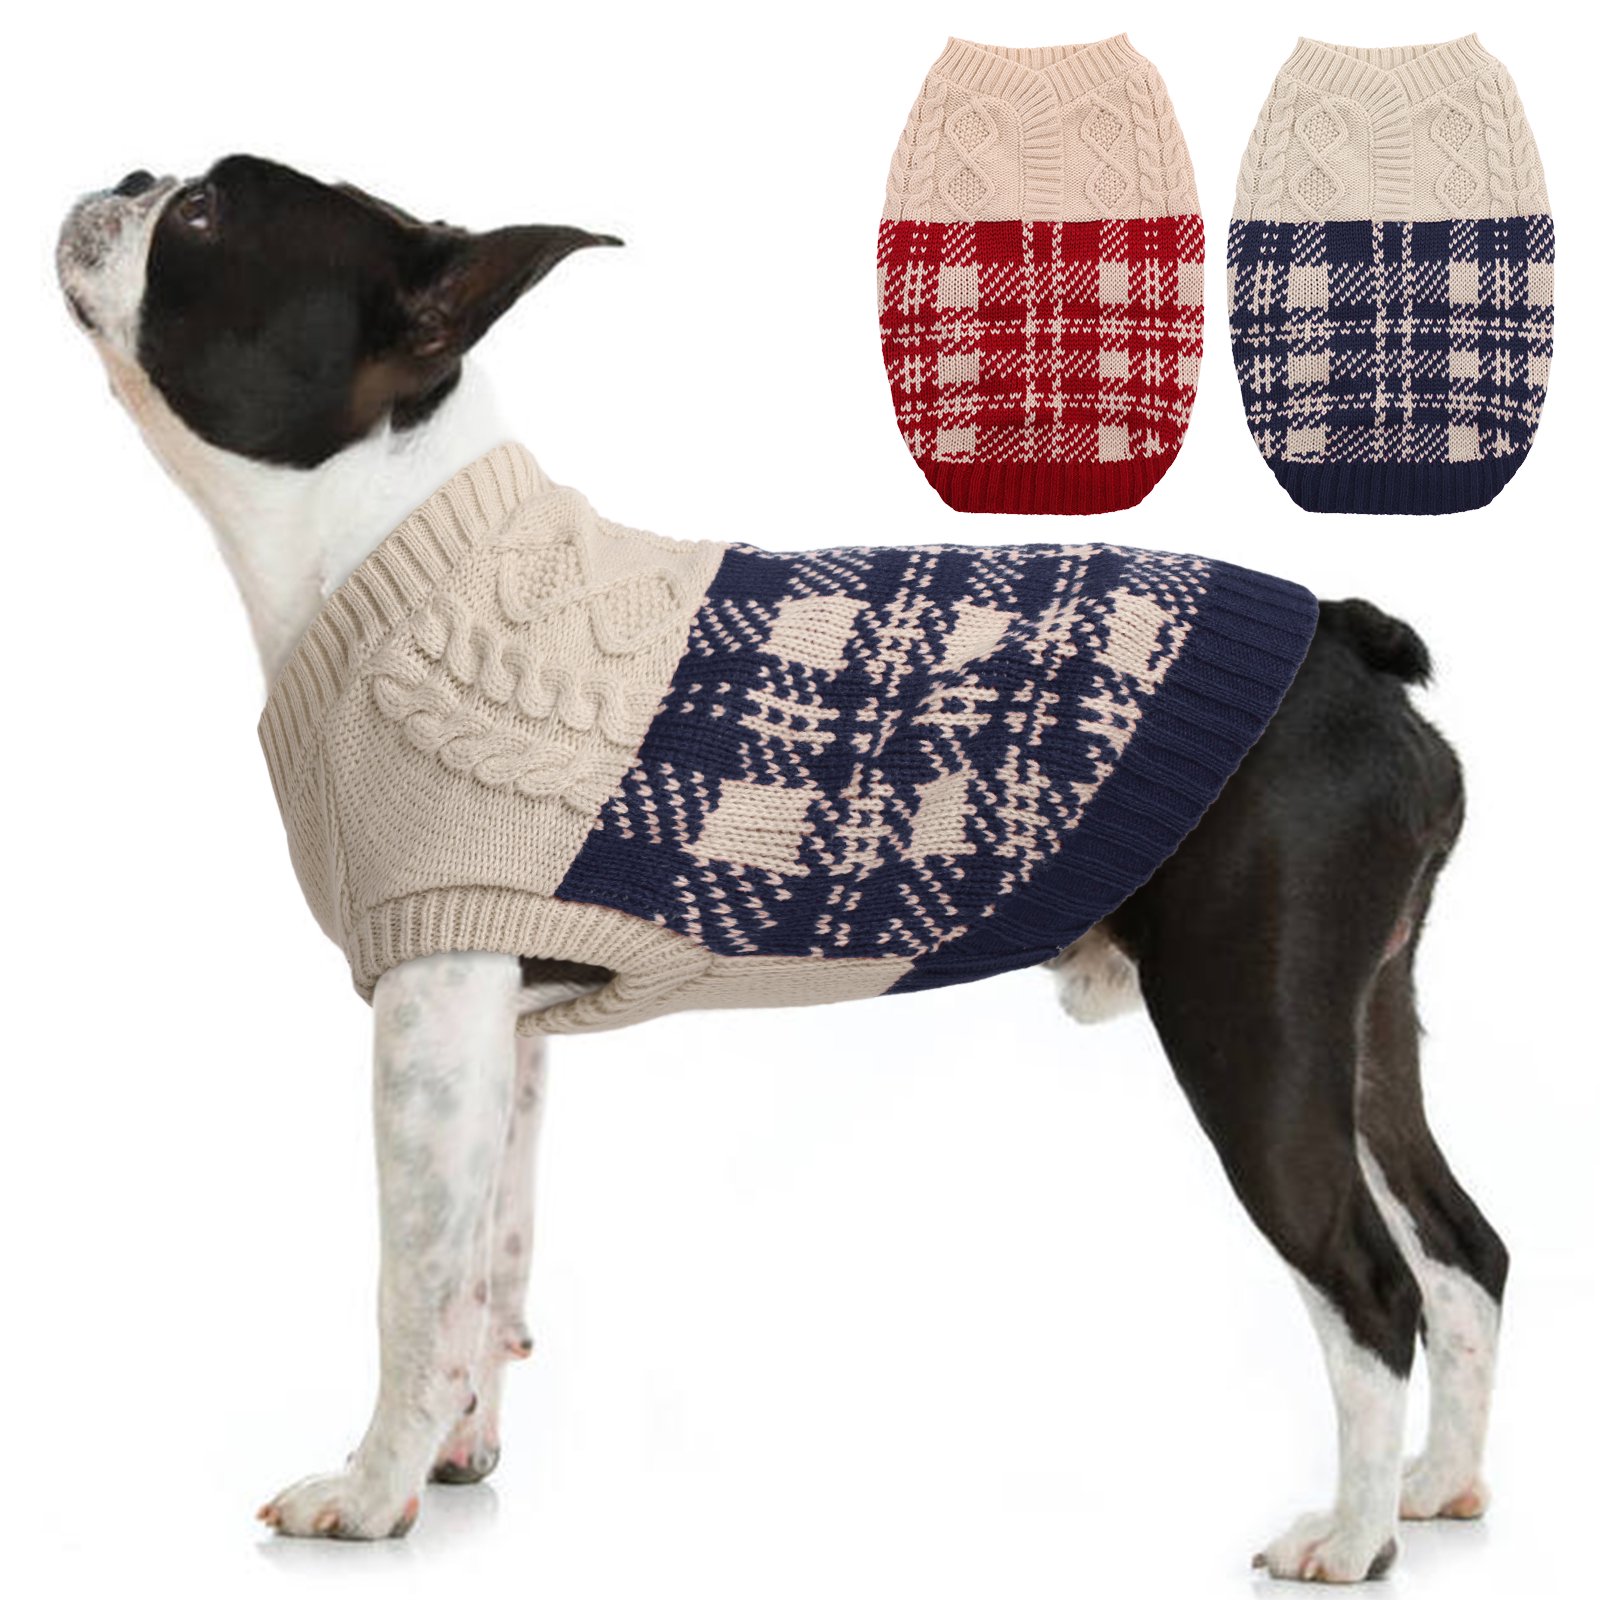 Winter Dog Jumper Knitted Sweater, Puppy Cat Sweaters Knitting